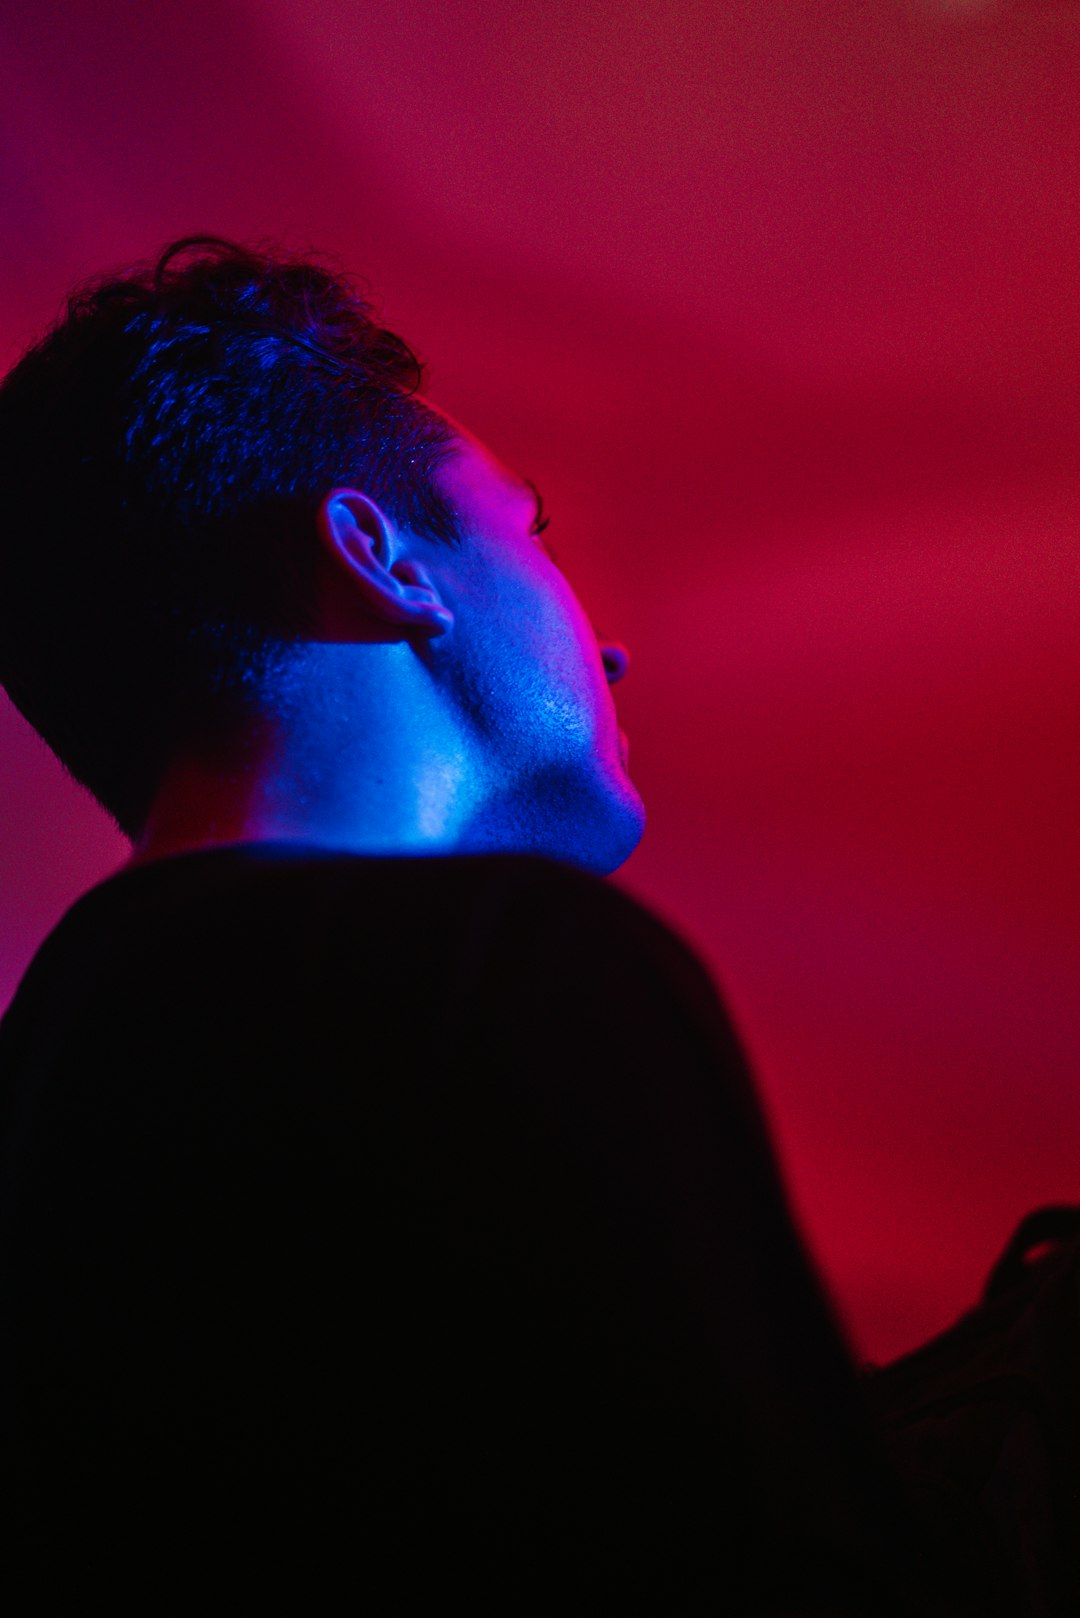 man in black shirt with blue and red lights on his head